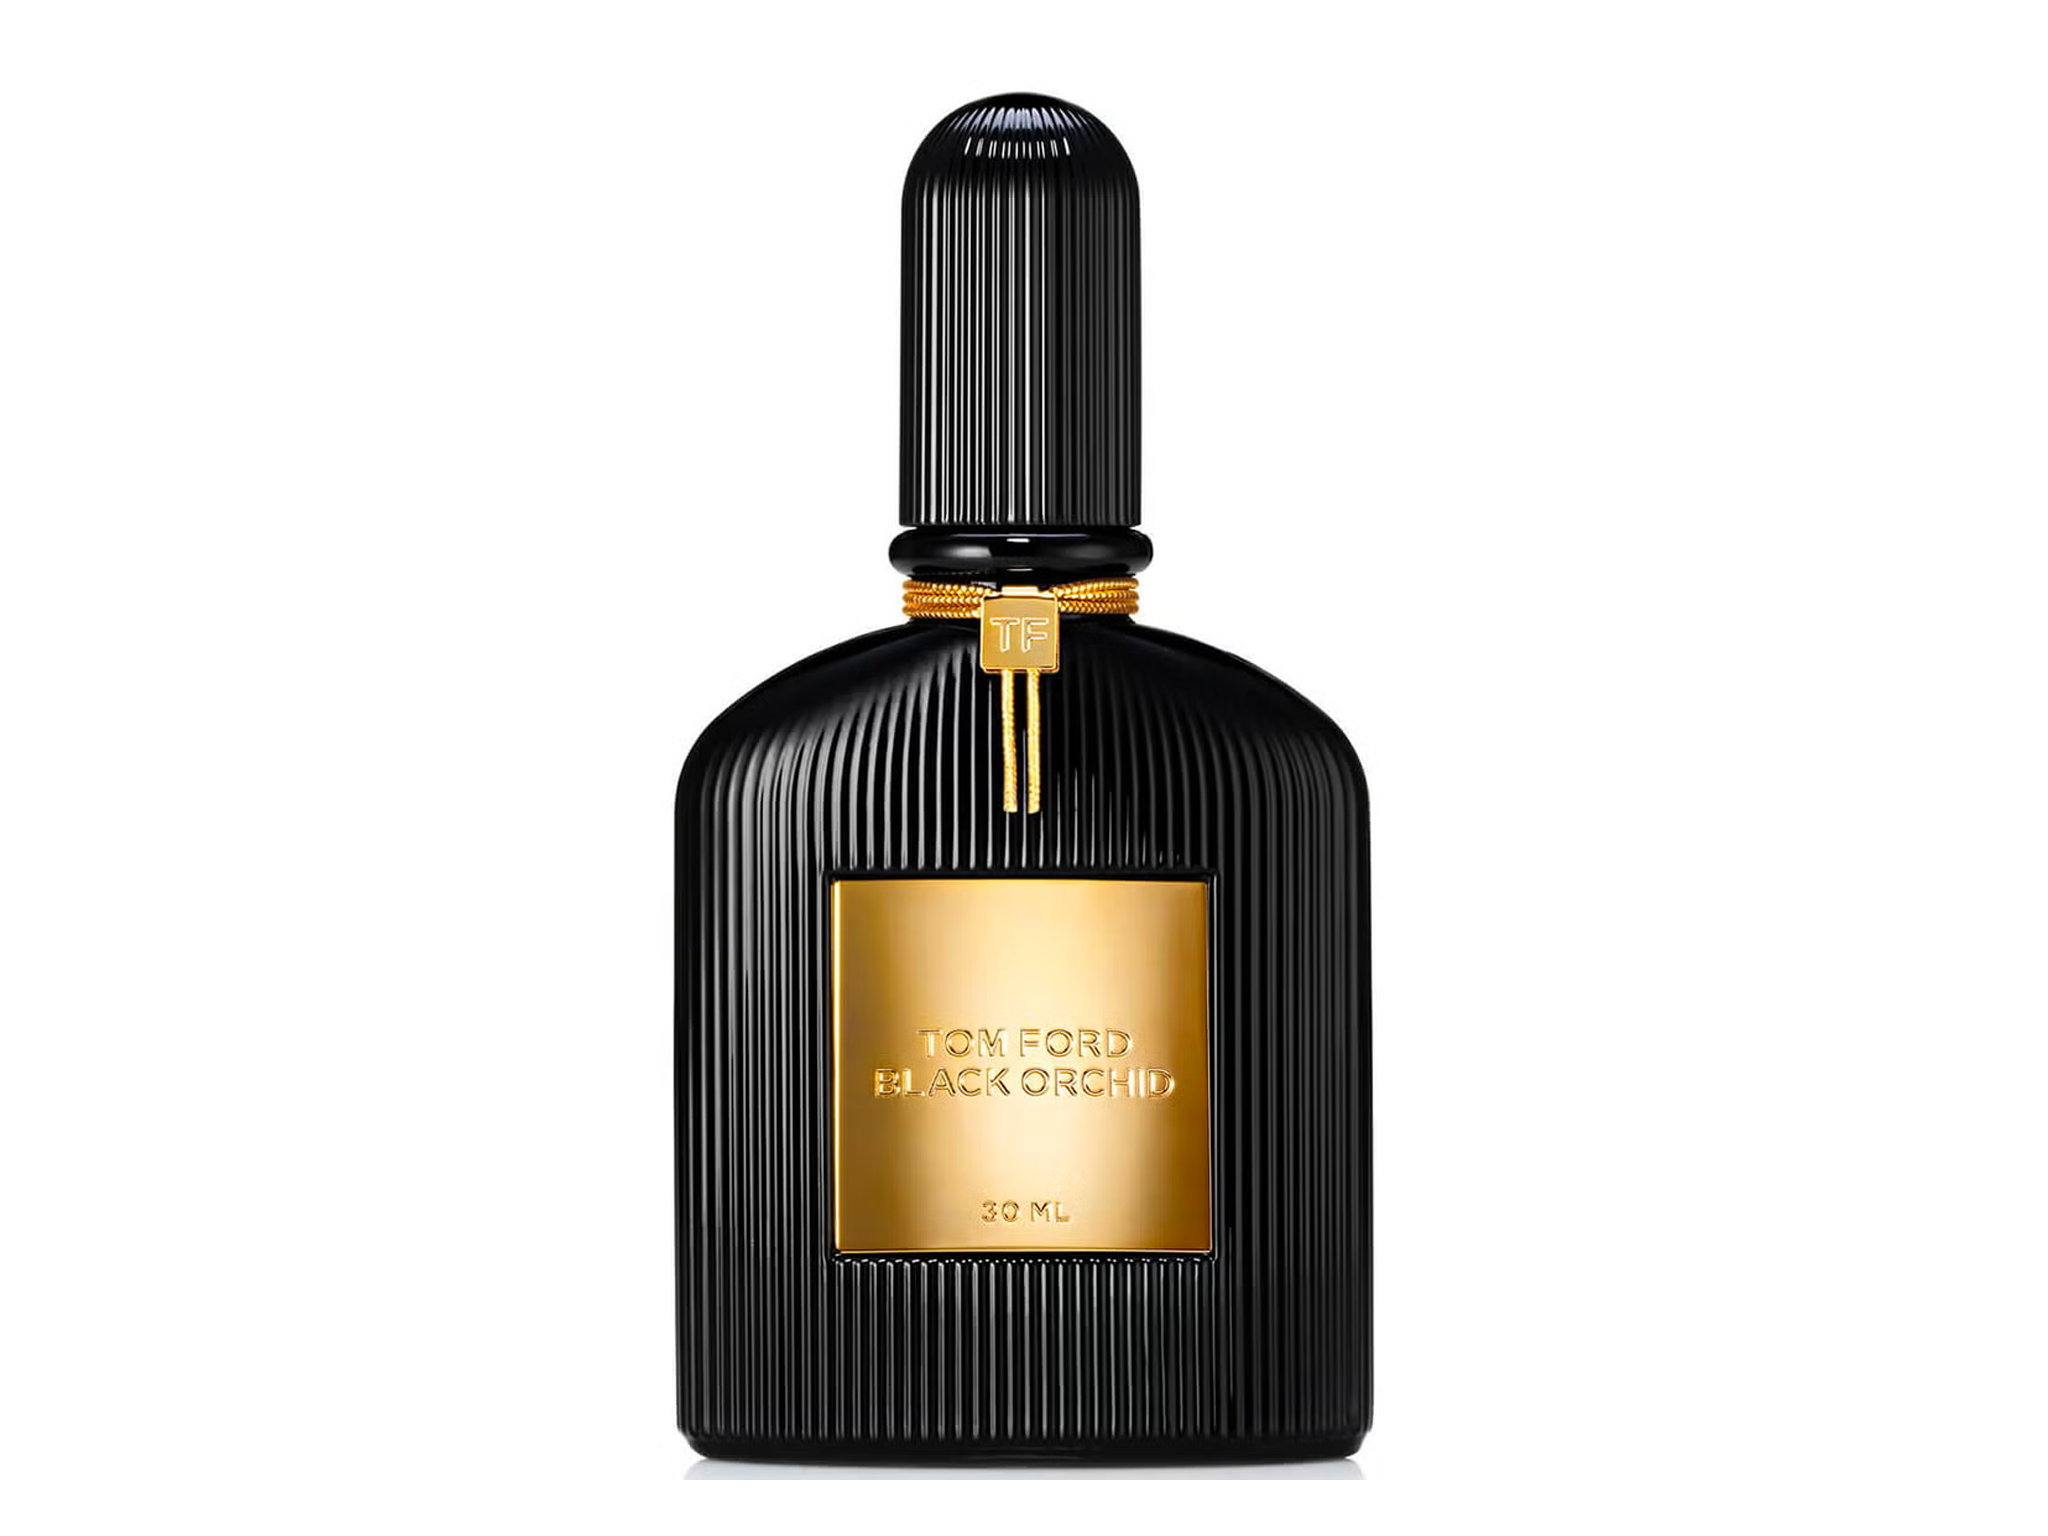 Tom-ford-black-orchid-indybest